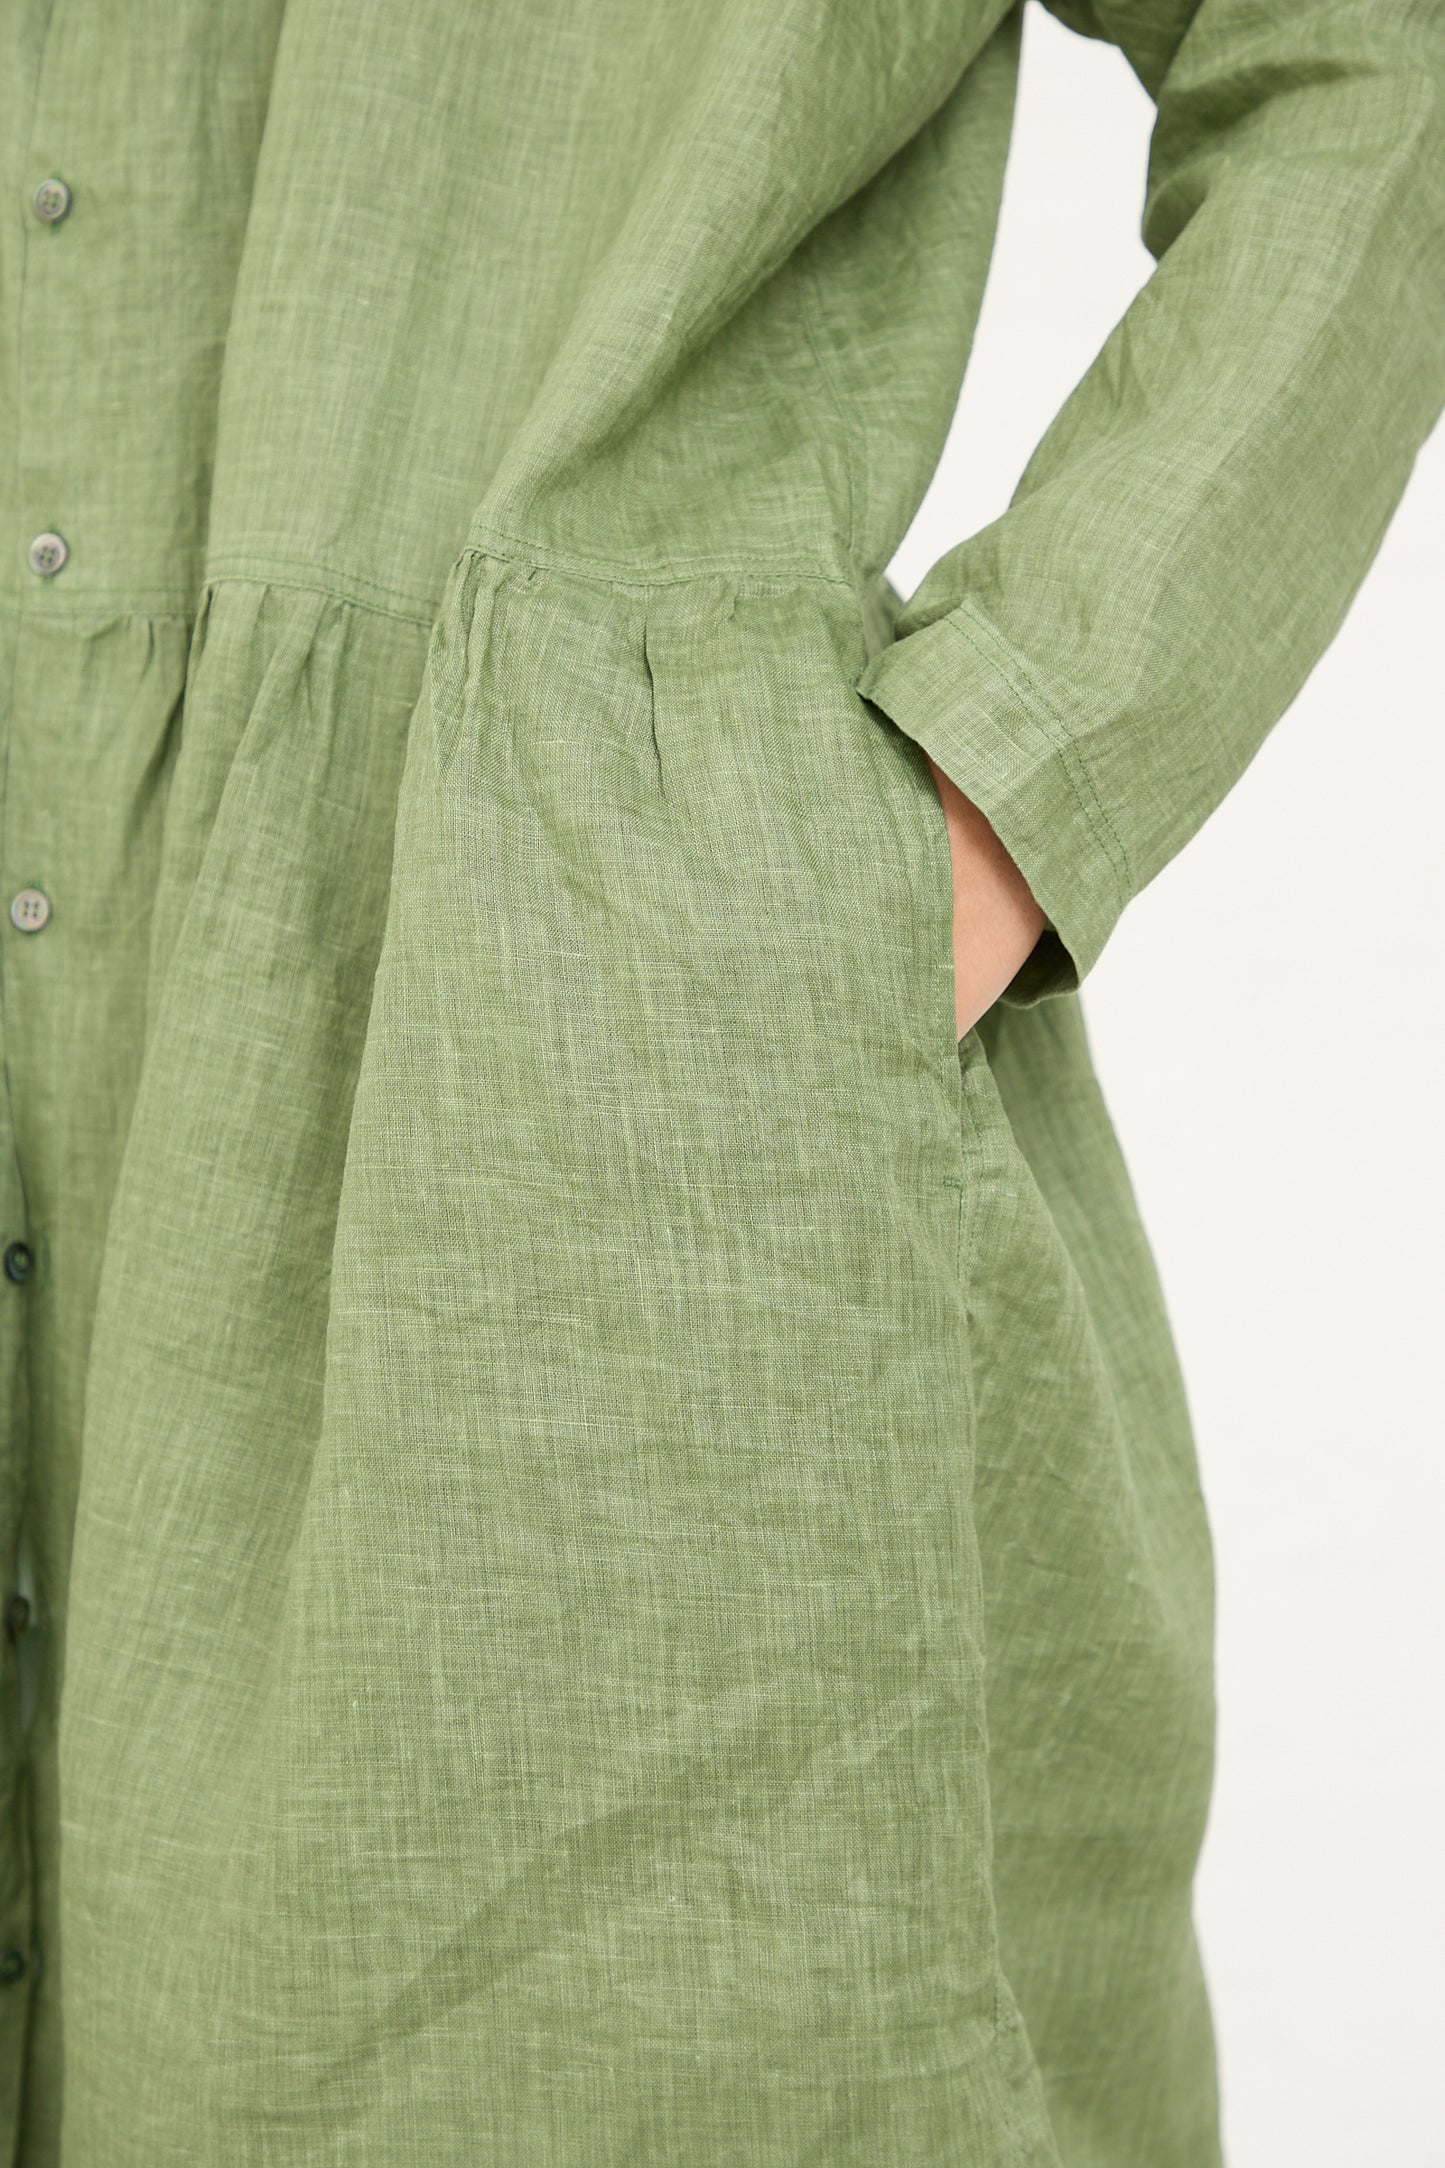 Close-up of a person wearing an Ichi Antiquités pigment-dyed linen shirt with their hand in the pocket.